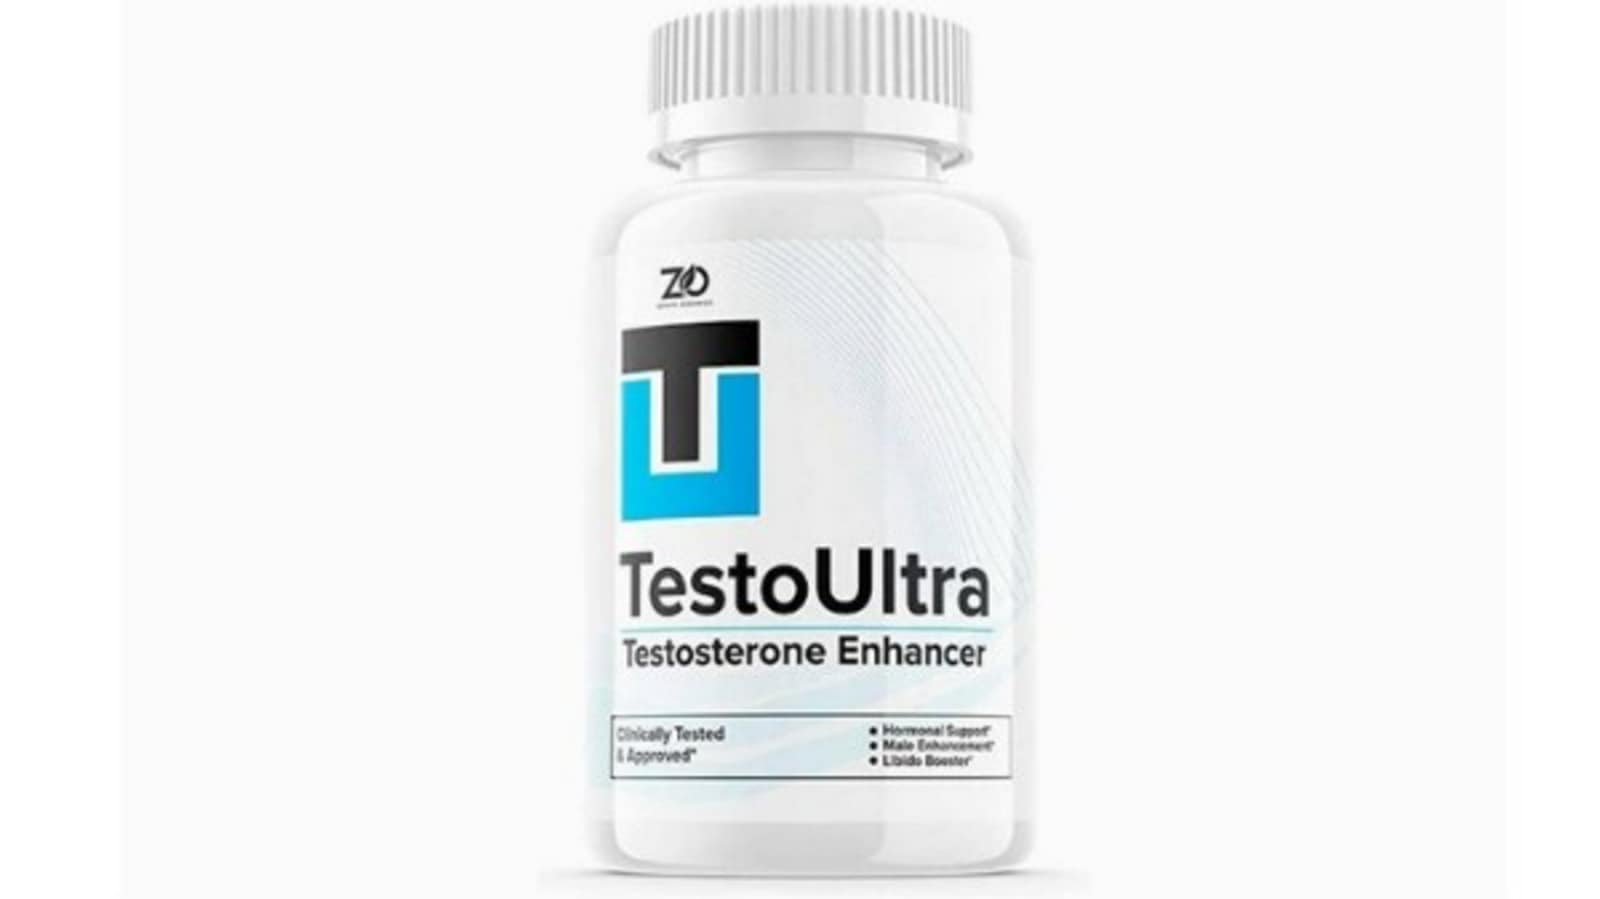 TestoUltra Review: Is Testo Ultra Legit Supplement? - Hindustan Times